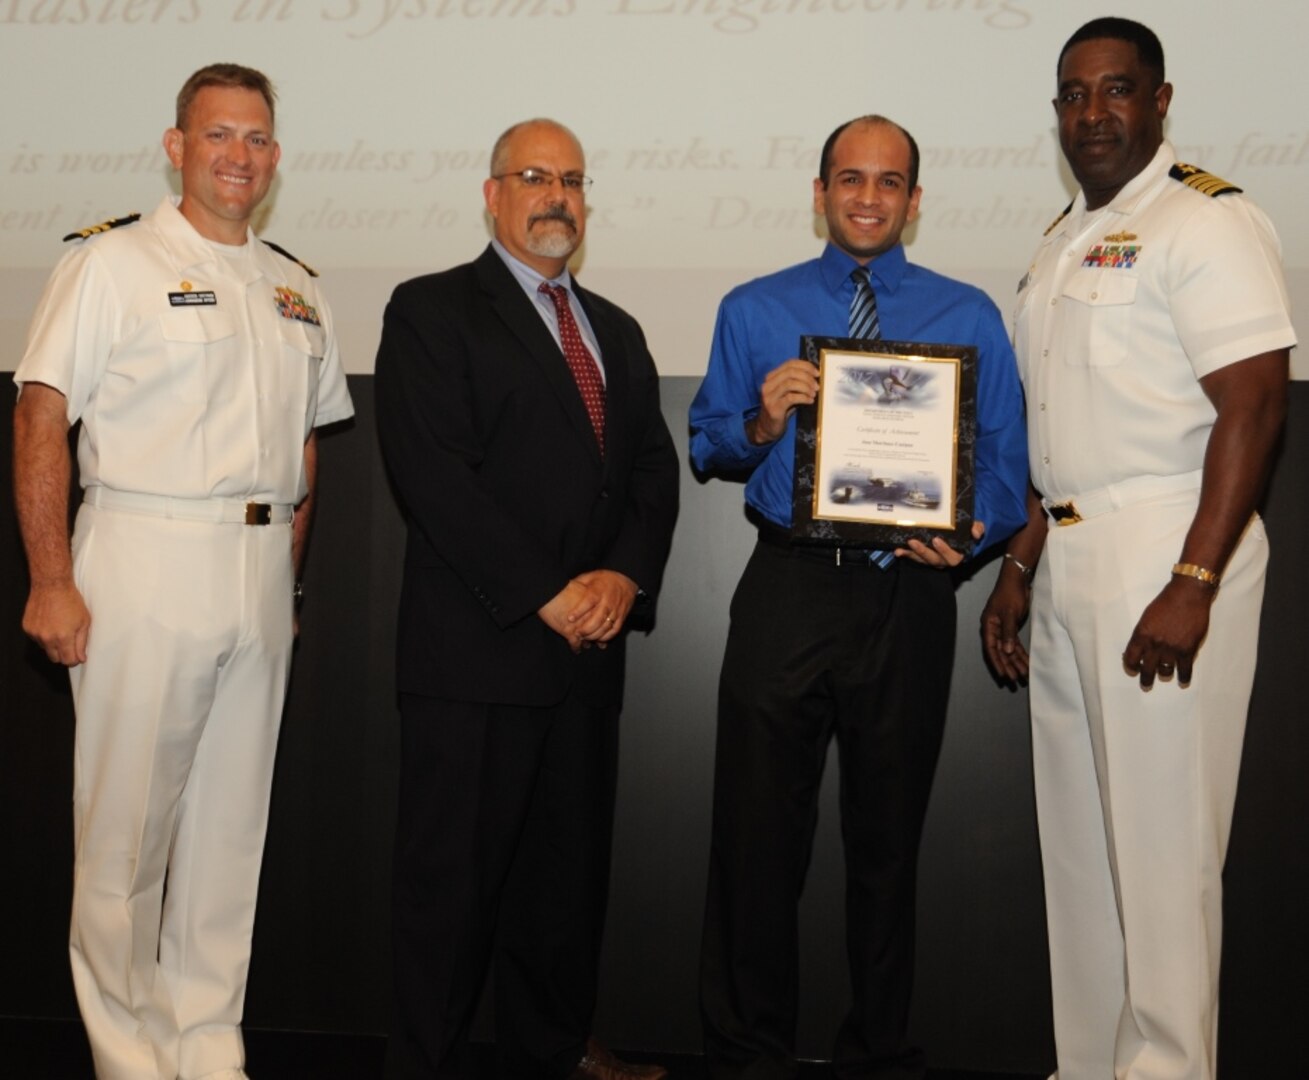 IMAGE: DAHLGREN, Va. - Jose Martinez-Casiano receives his certificate of achievement from Naval Surface Warfare Center Dahlgren Division (NSWCDD) Technical Director John Fiore, NSWCDD Commanding Officer Capt. Godfrey 'Gus' Weekes, right, and Combat Direction Systems Activity Dam Neck Commanding Officer Cmdr. Andrew Hoffman at the 2017 NSWCDD academic awards ceremony. Martinez-Casiano was recognized for completing his master's in systems engineering from the Naval Postgraduate School, and commended for his commitment to personal and professional development.